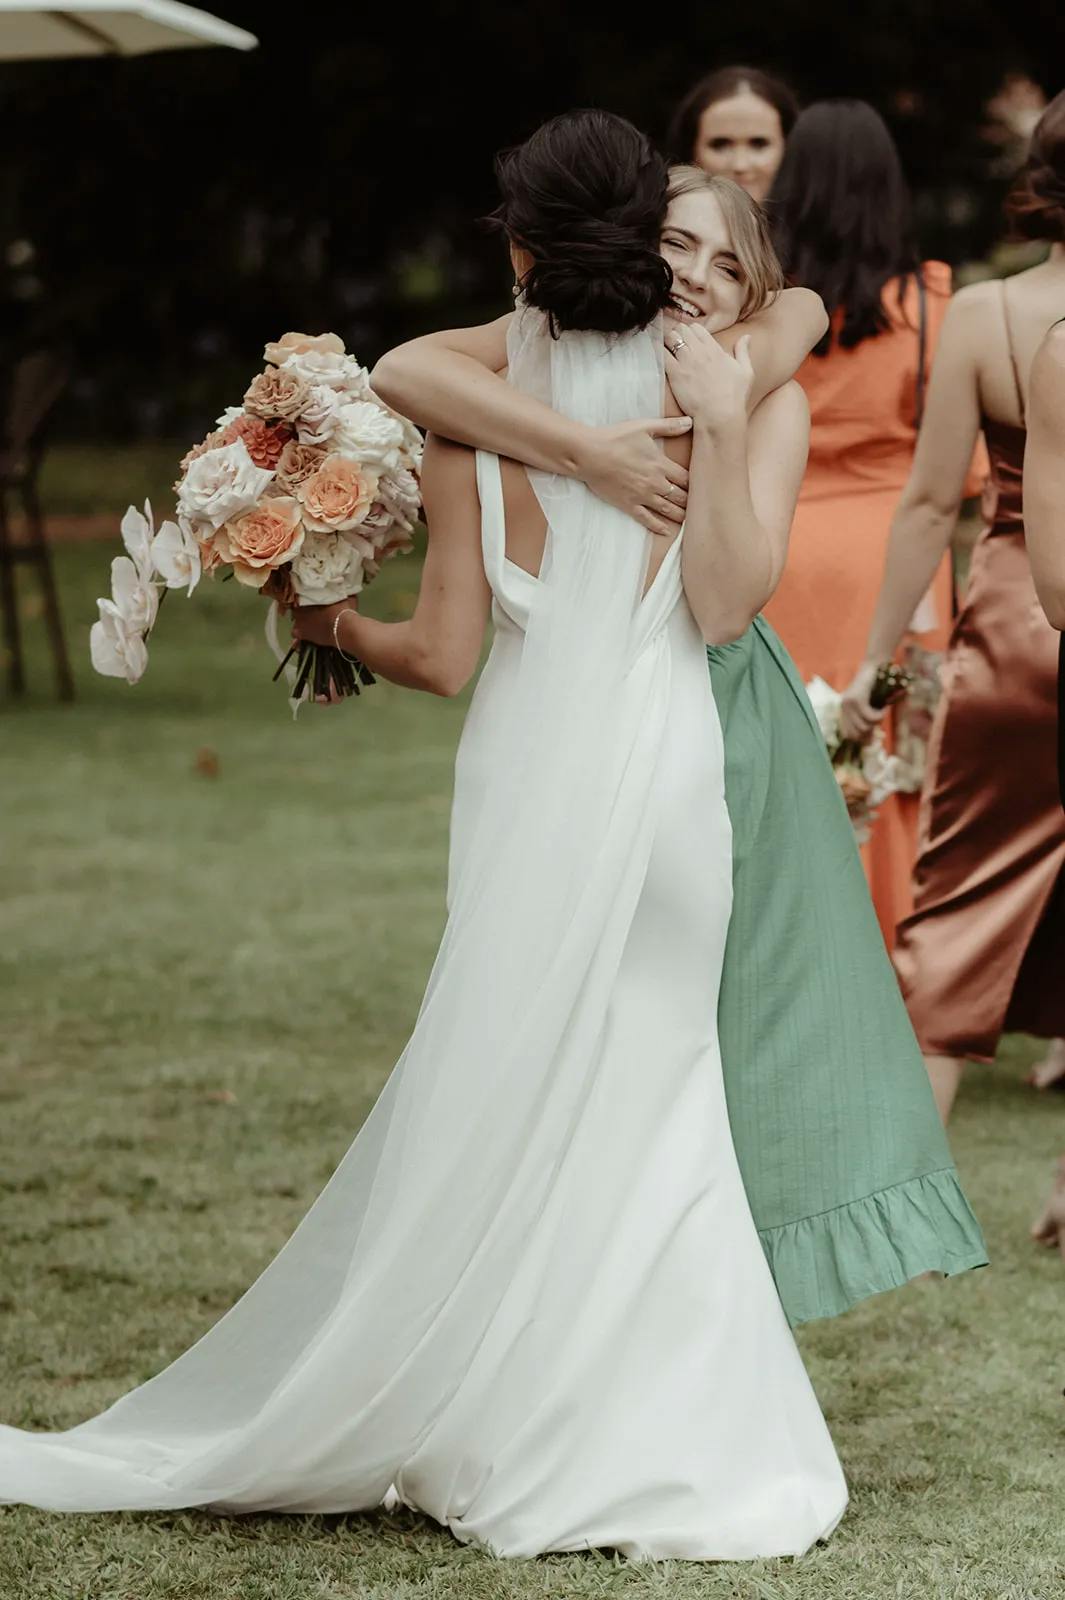 A bride in a white dress holding a bouquet of flowers hugs a woman in a green dress at an outdoor event. Other people dressed in formal attire are seen in the background. The atmosphere appears joyous and celebratory.